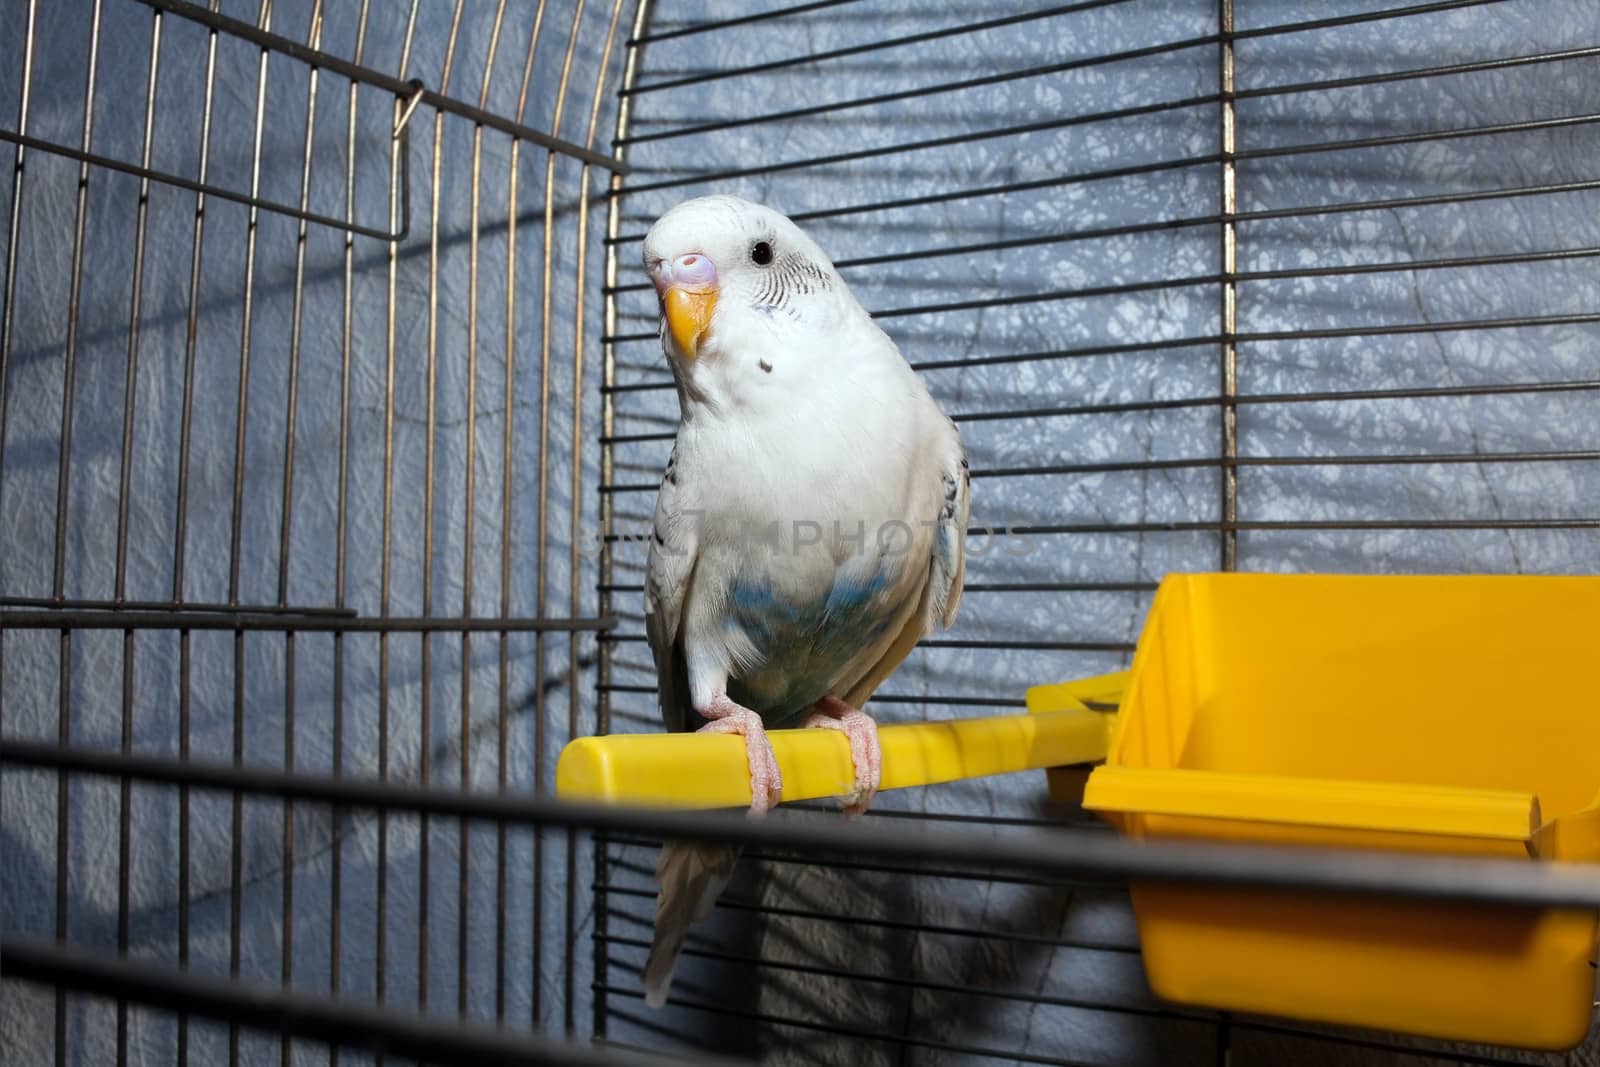 White wavy parrot in a metal cage on a perch